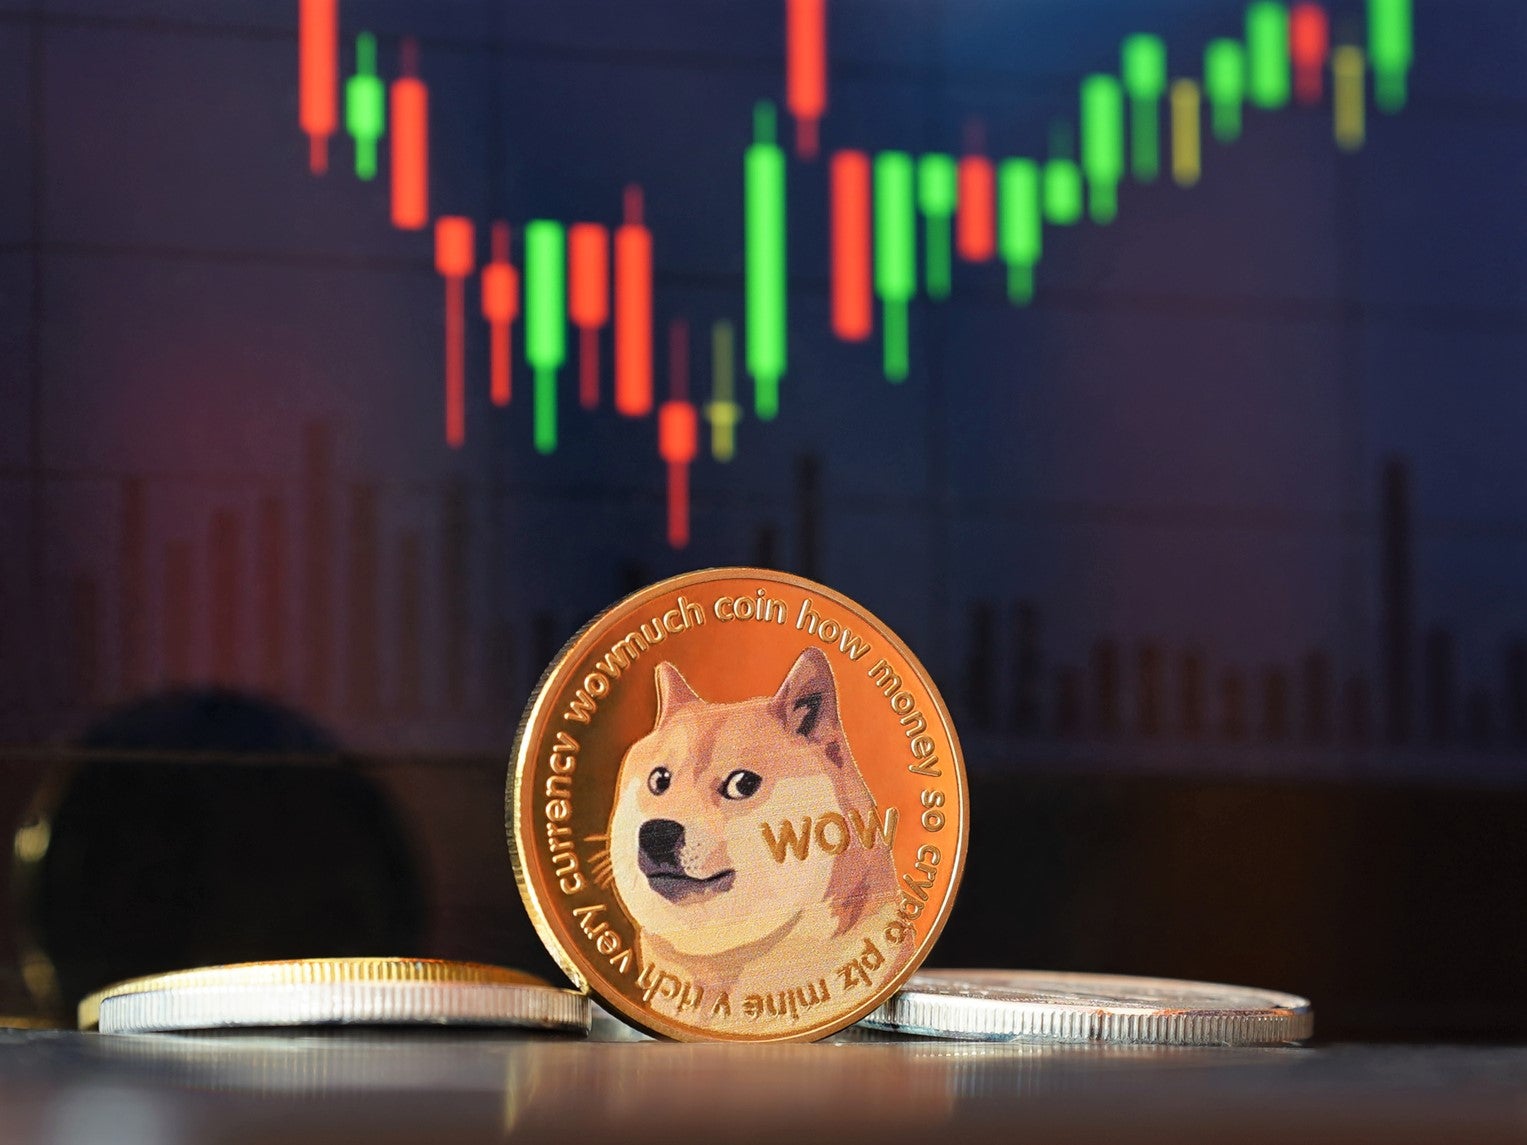 Dogecoin returned to the top 10 most valuable cryptocurrencies on 26 April, 2022, after a price rise following Elon Musk’s takeover of Twitter